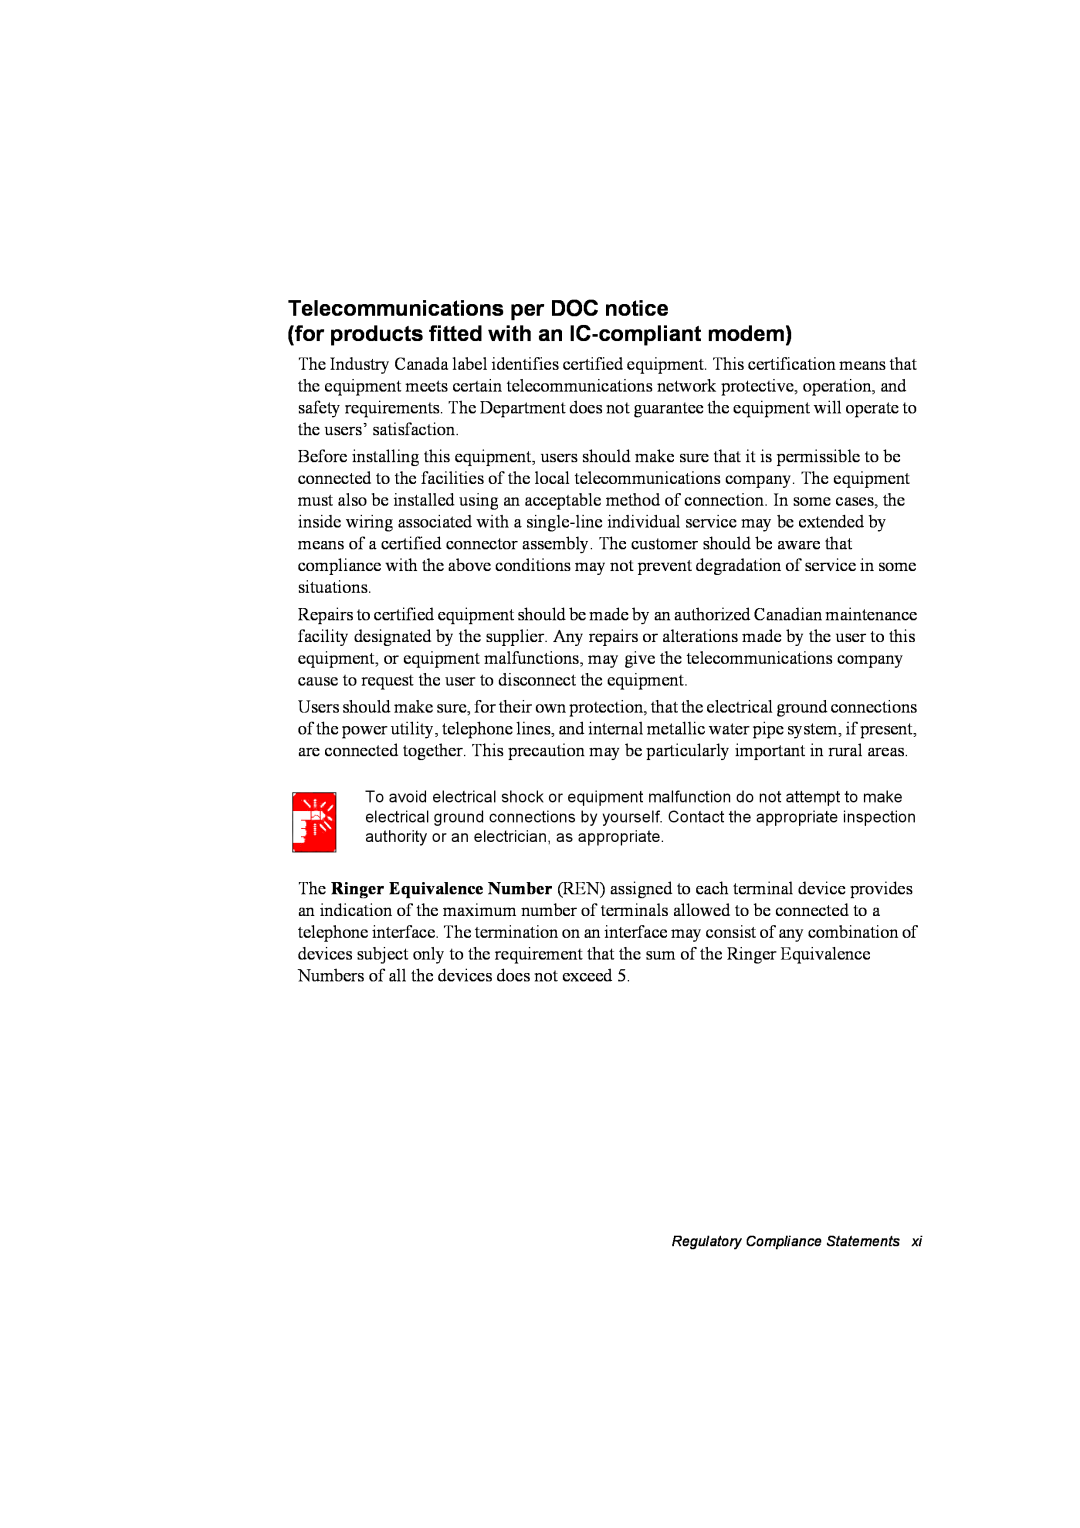 Samsung EV-NX10ZZBABUA, EV-NX10ZZBABZA Telecommunications per DOC notice, for products fitted with an IC-compliant modem 